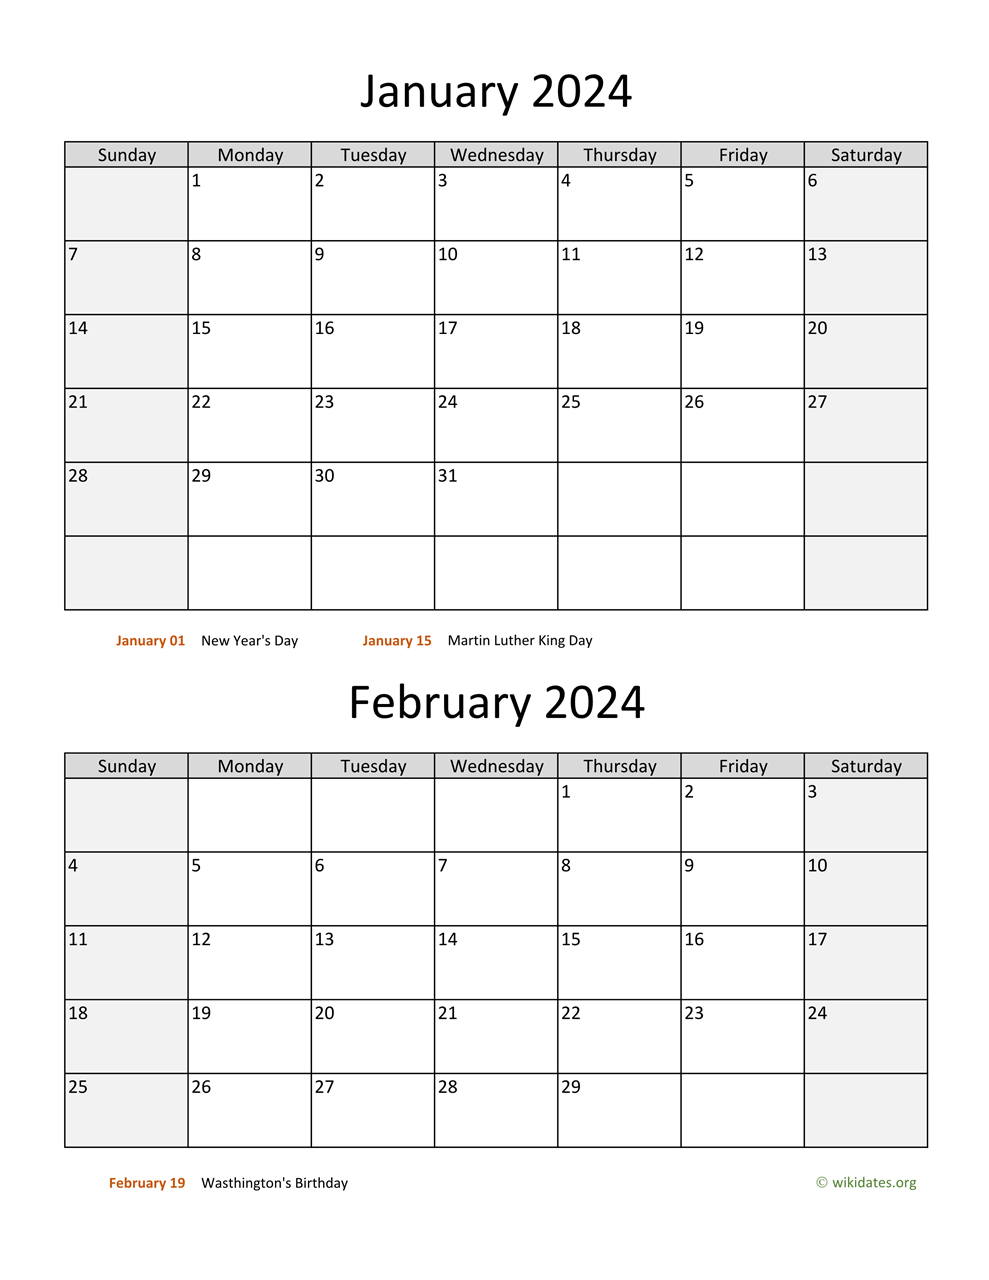 January And February 2024 Calendar | Wikidates for Printable January February 2024 Calendar